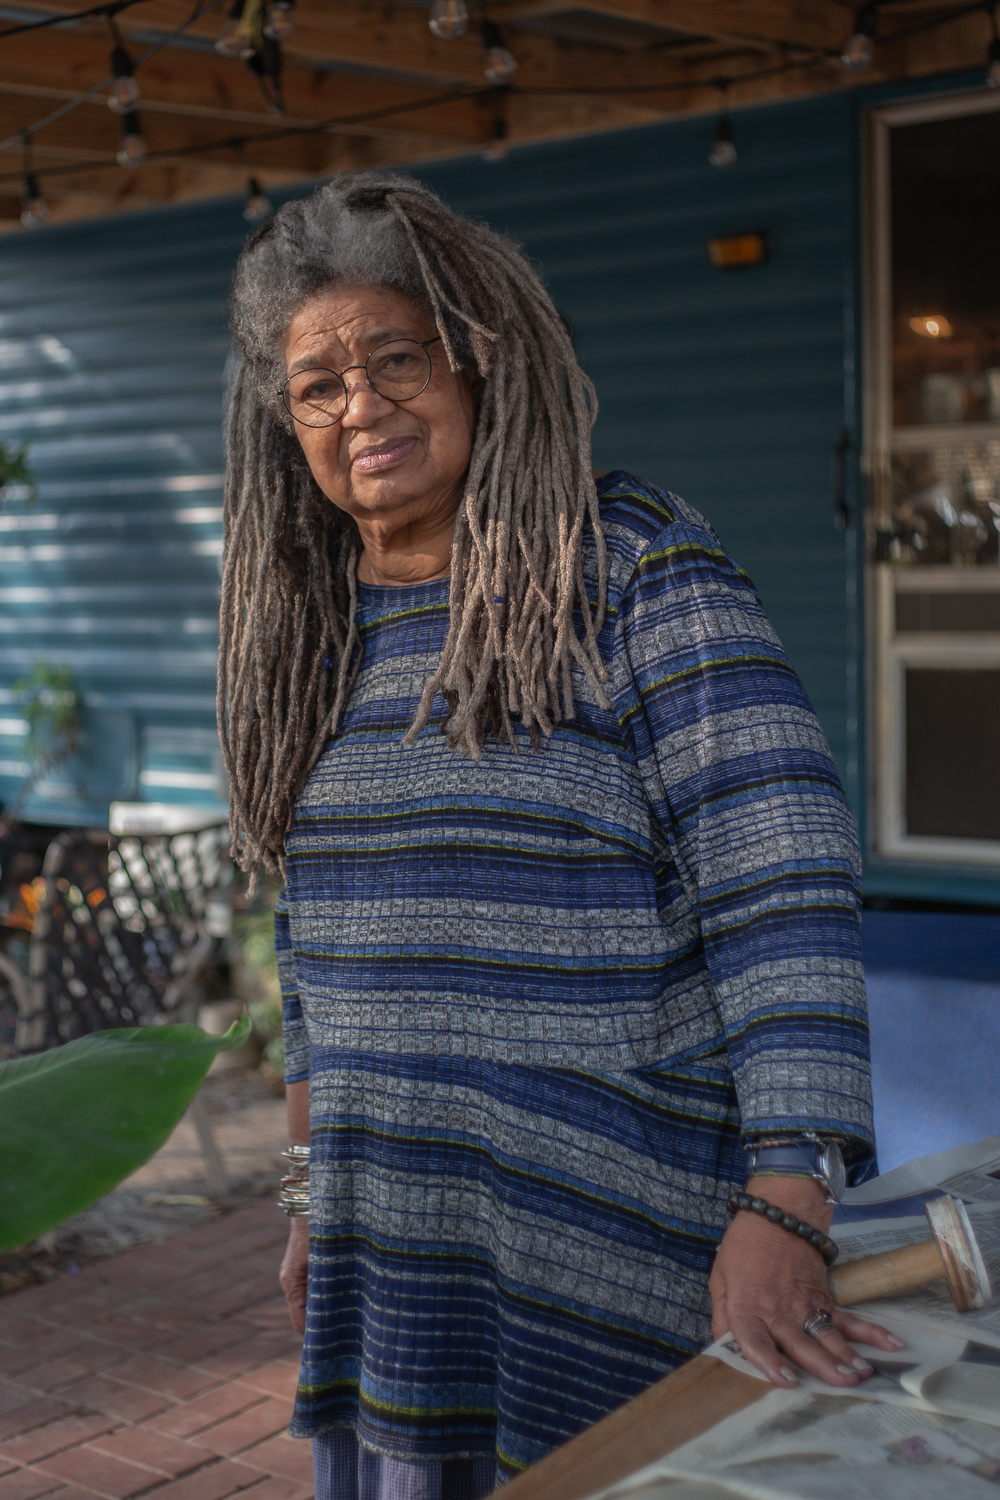 Textile artist and educator Arianne King Comer sits for a portrait, in Wadmalaw Island, South Carolina. King Comer, who has been an Artist in Residence for the State of South Carolina since 1995, describes the connection between indigo and South Carolina as "spiritual." In 2021, King Comer was Artist in Residence at Ashley Hall, a girls' preparatory school, in Charleston, South Carolina. “Indigo is the voice of our ancestors,” says King Comer.